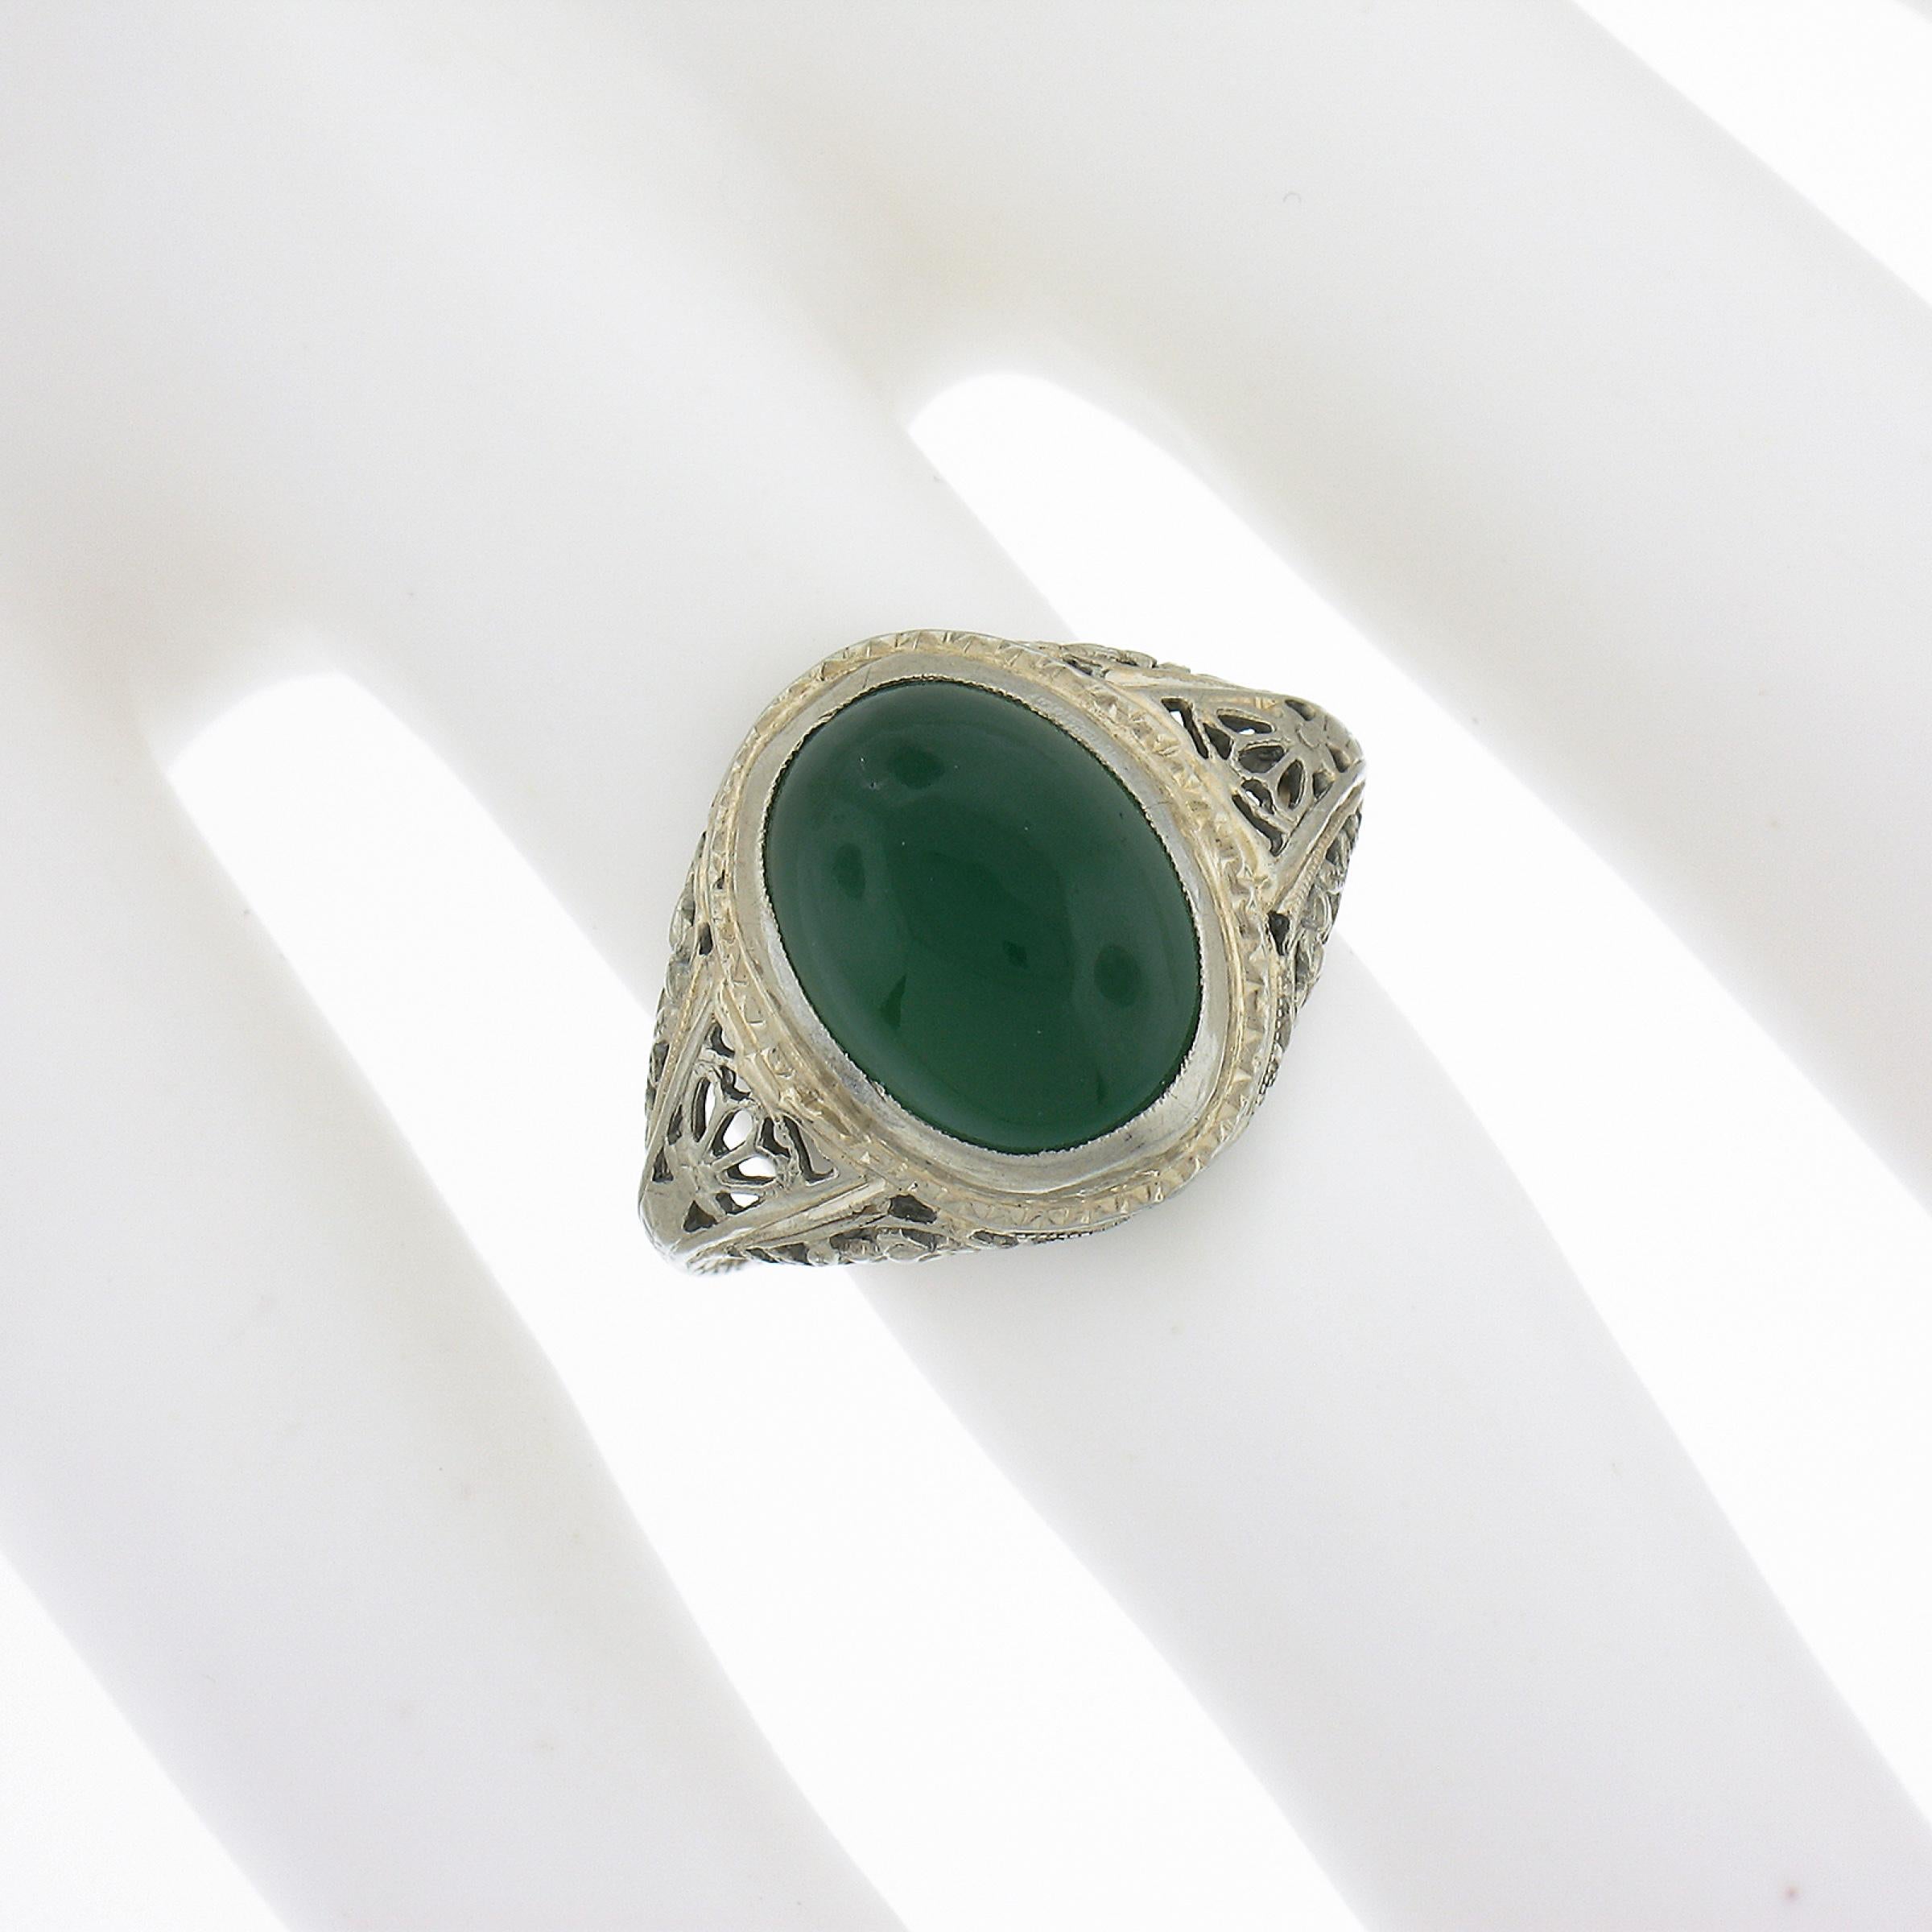 Antique 18K Gold Oval Cabochon Cut Onyx or Chrysoprase Solitaire Filigree Ring In Excellent Condition For Sale In Montclair, NJ